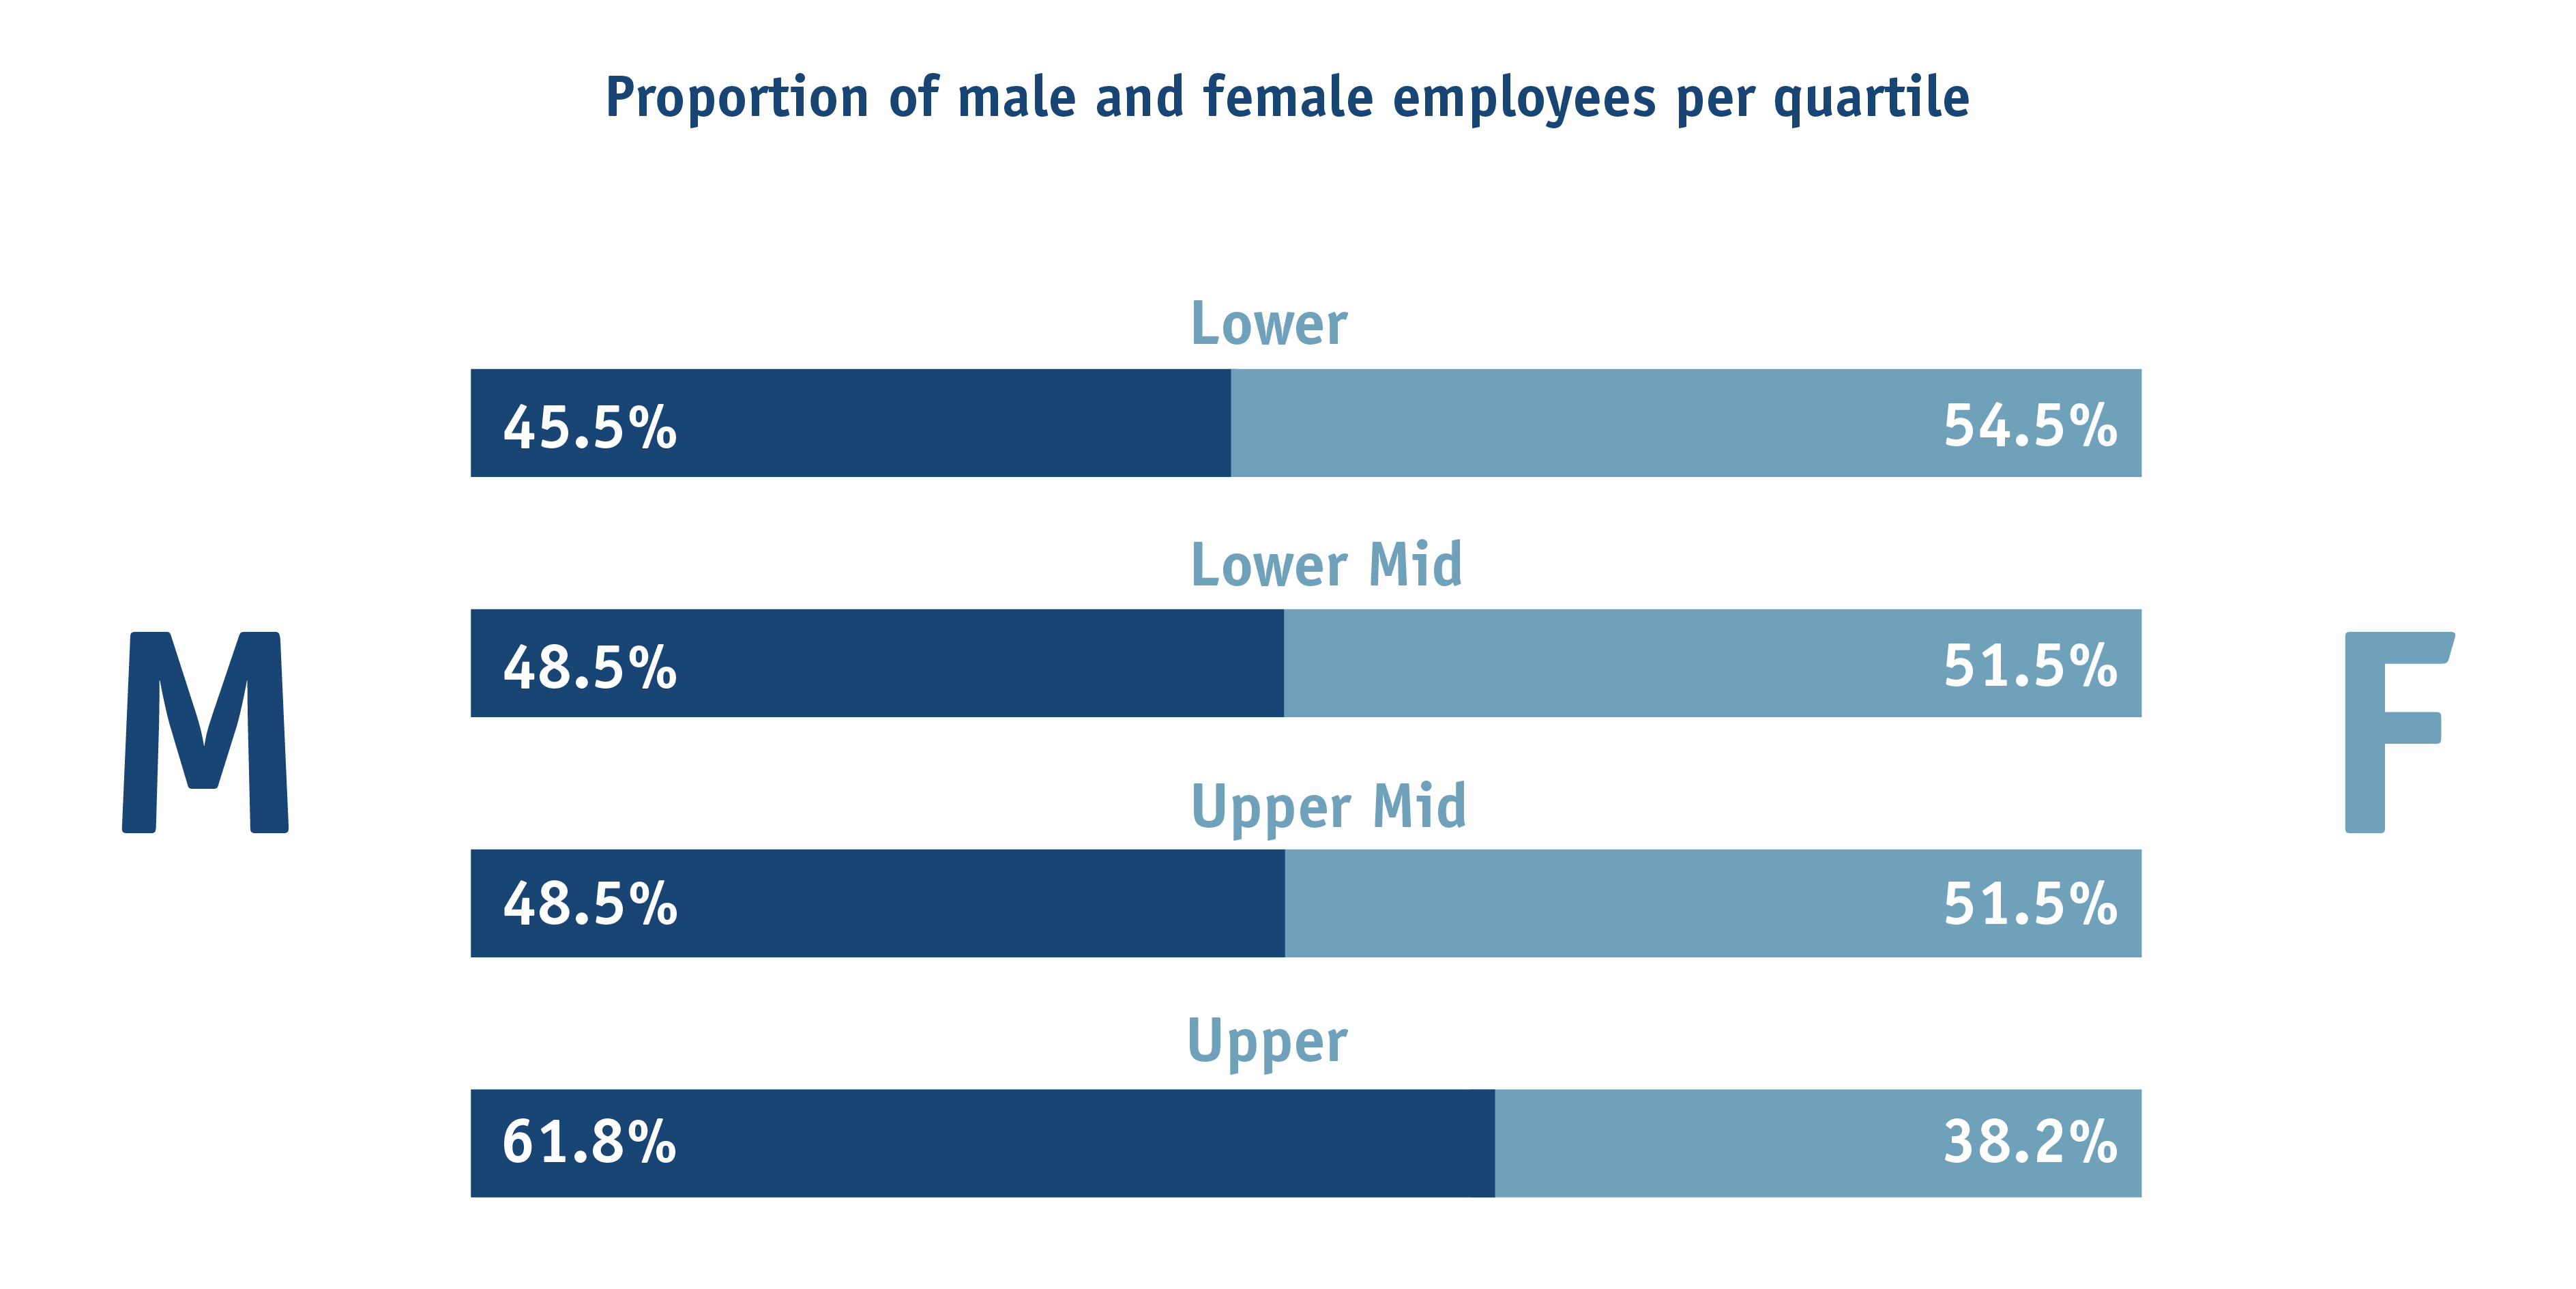 Proportion of males and females in each quartile band